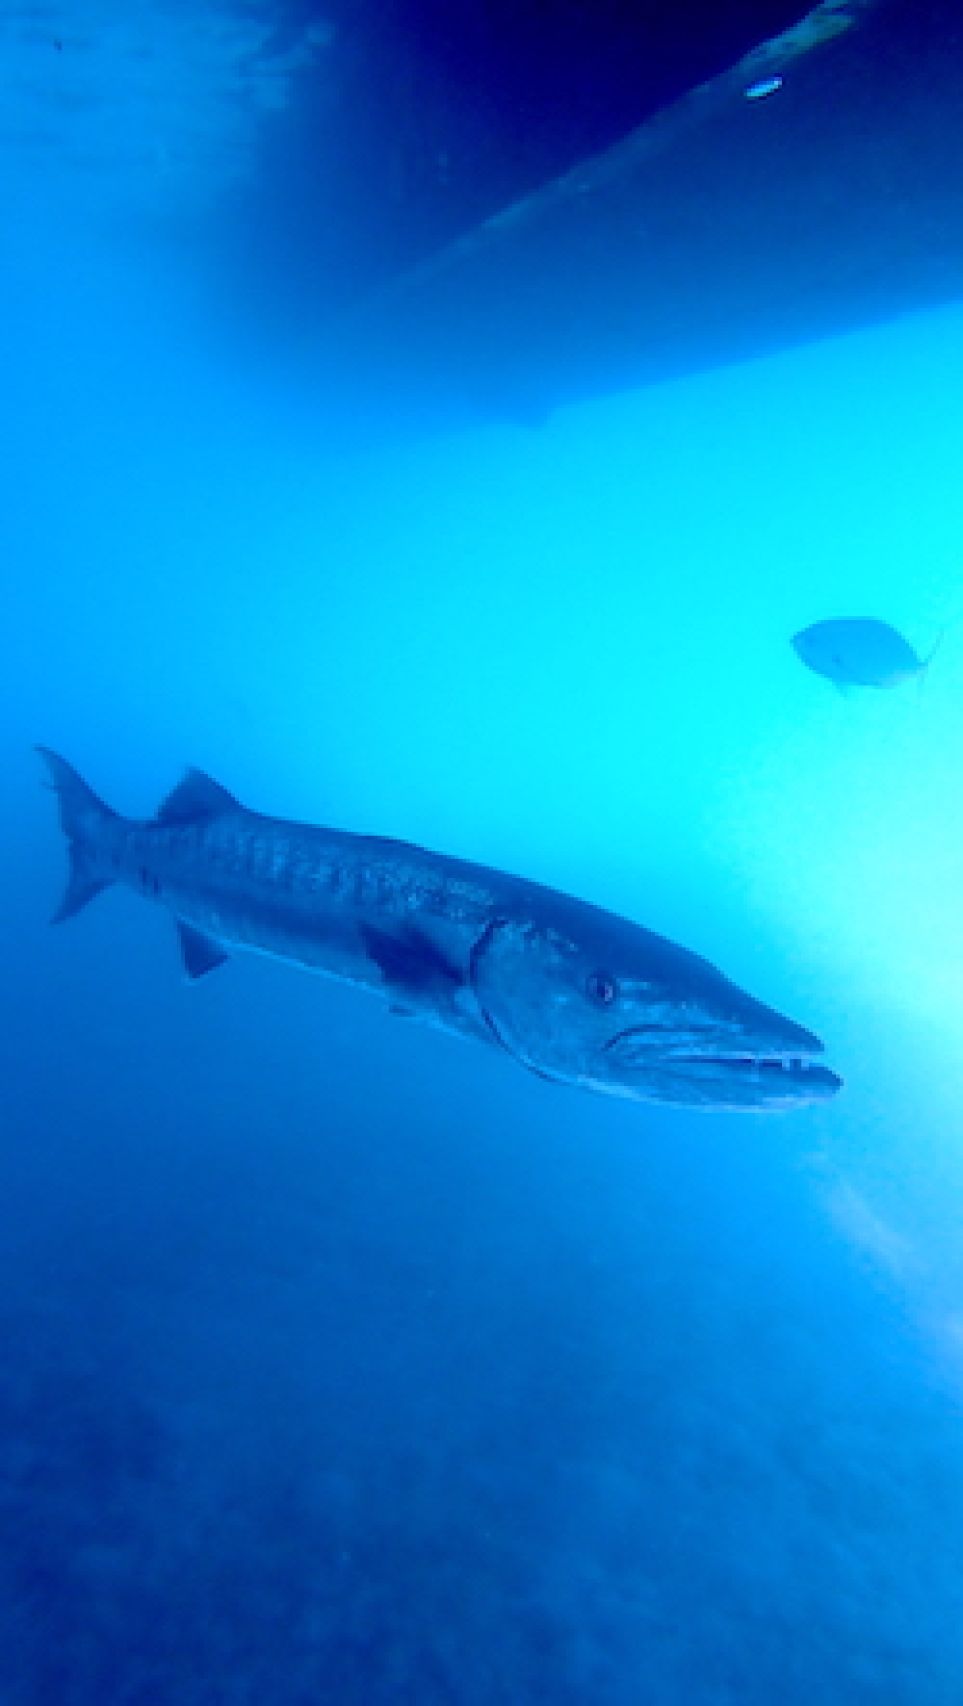 barracuda in the shadows hanging under a boat